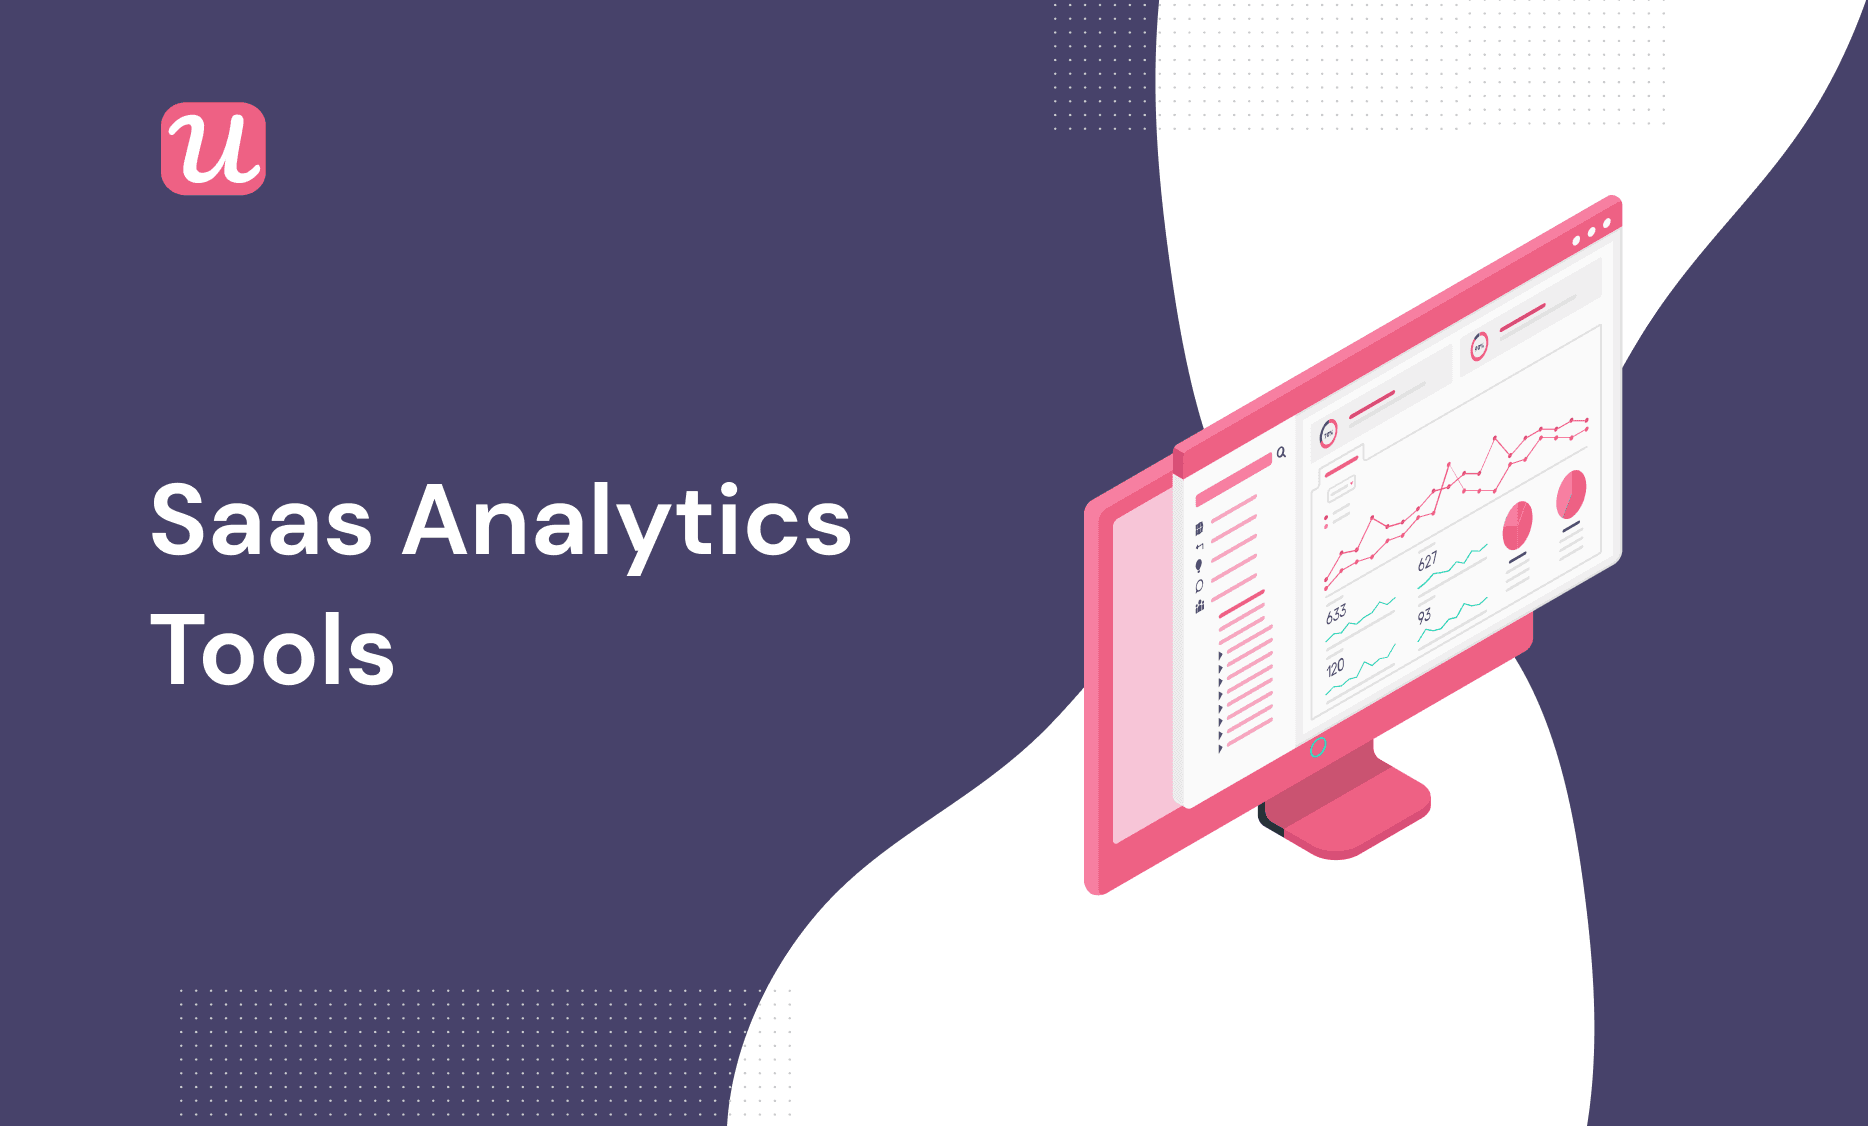 Saas analytics tools [Best 20+ SaaS Analytics Tools For 2021 - By Use Case]